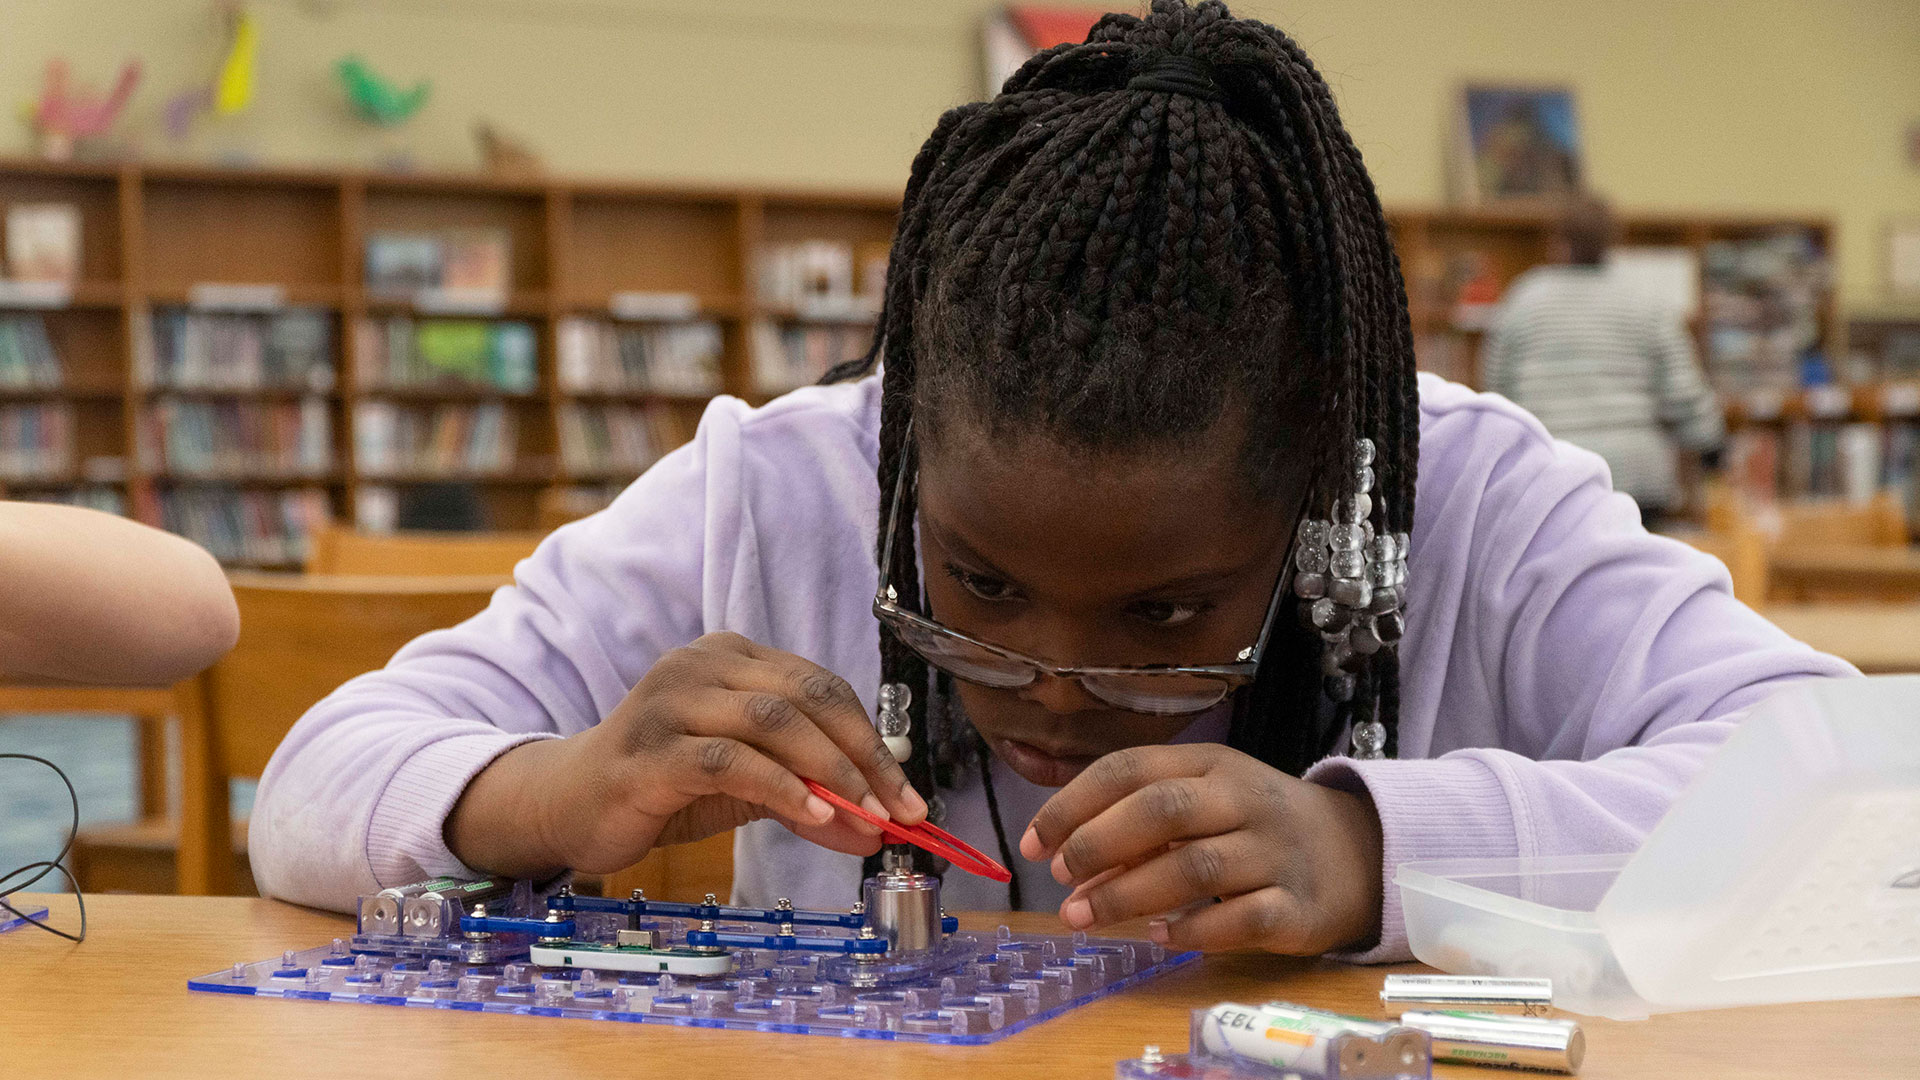 A girl at a table in a library putting an electric device together.